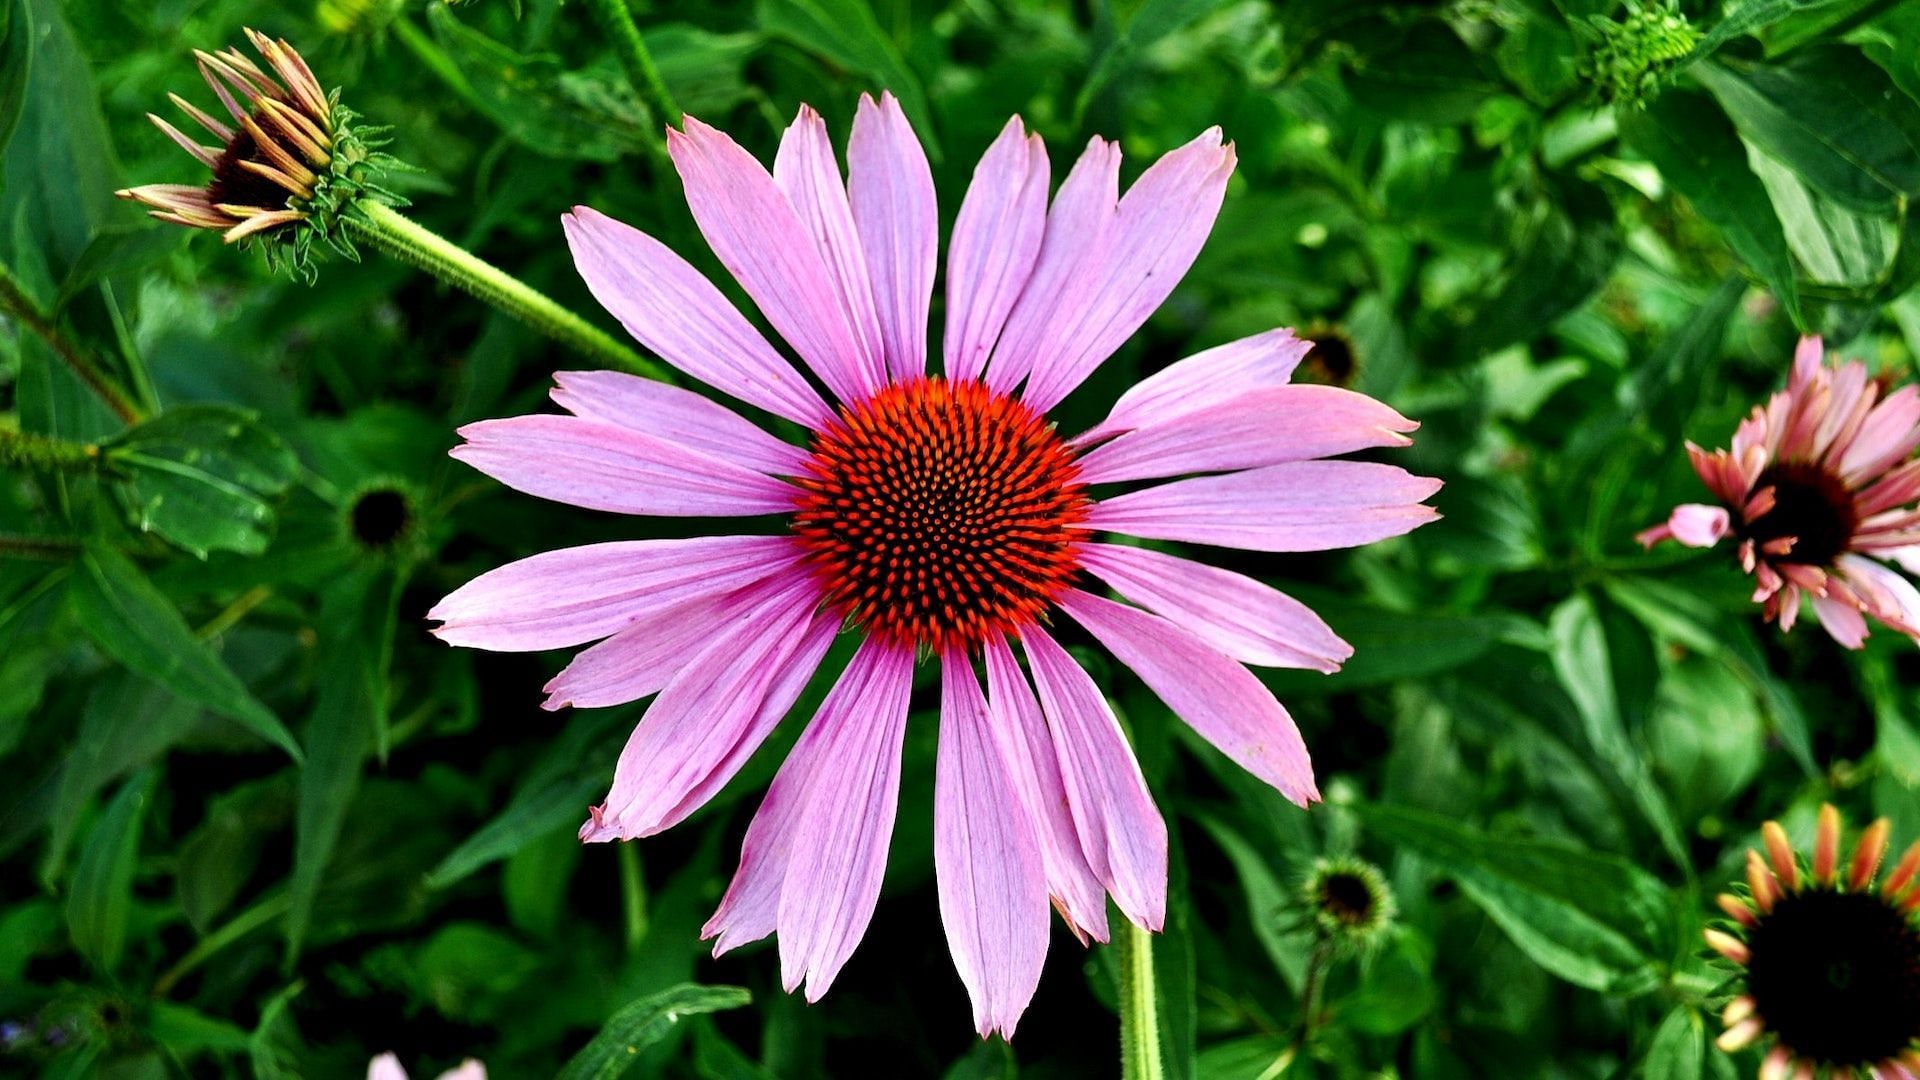 The truth about these flowers. Image via Pexels/Skitter Photo